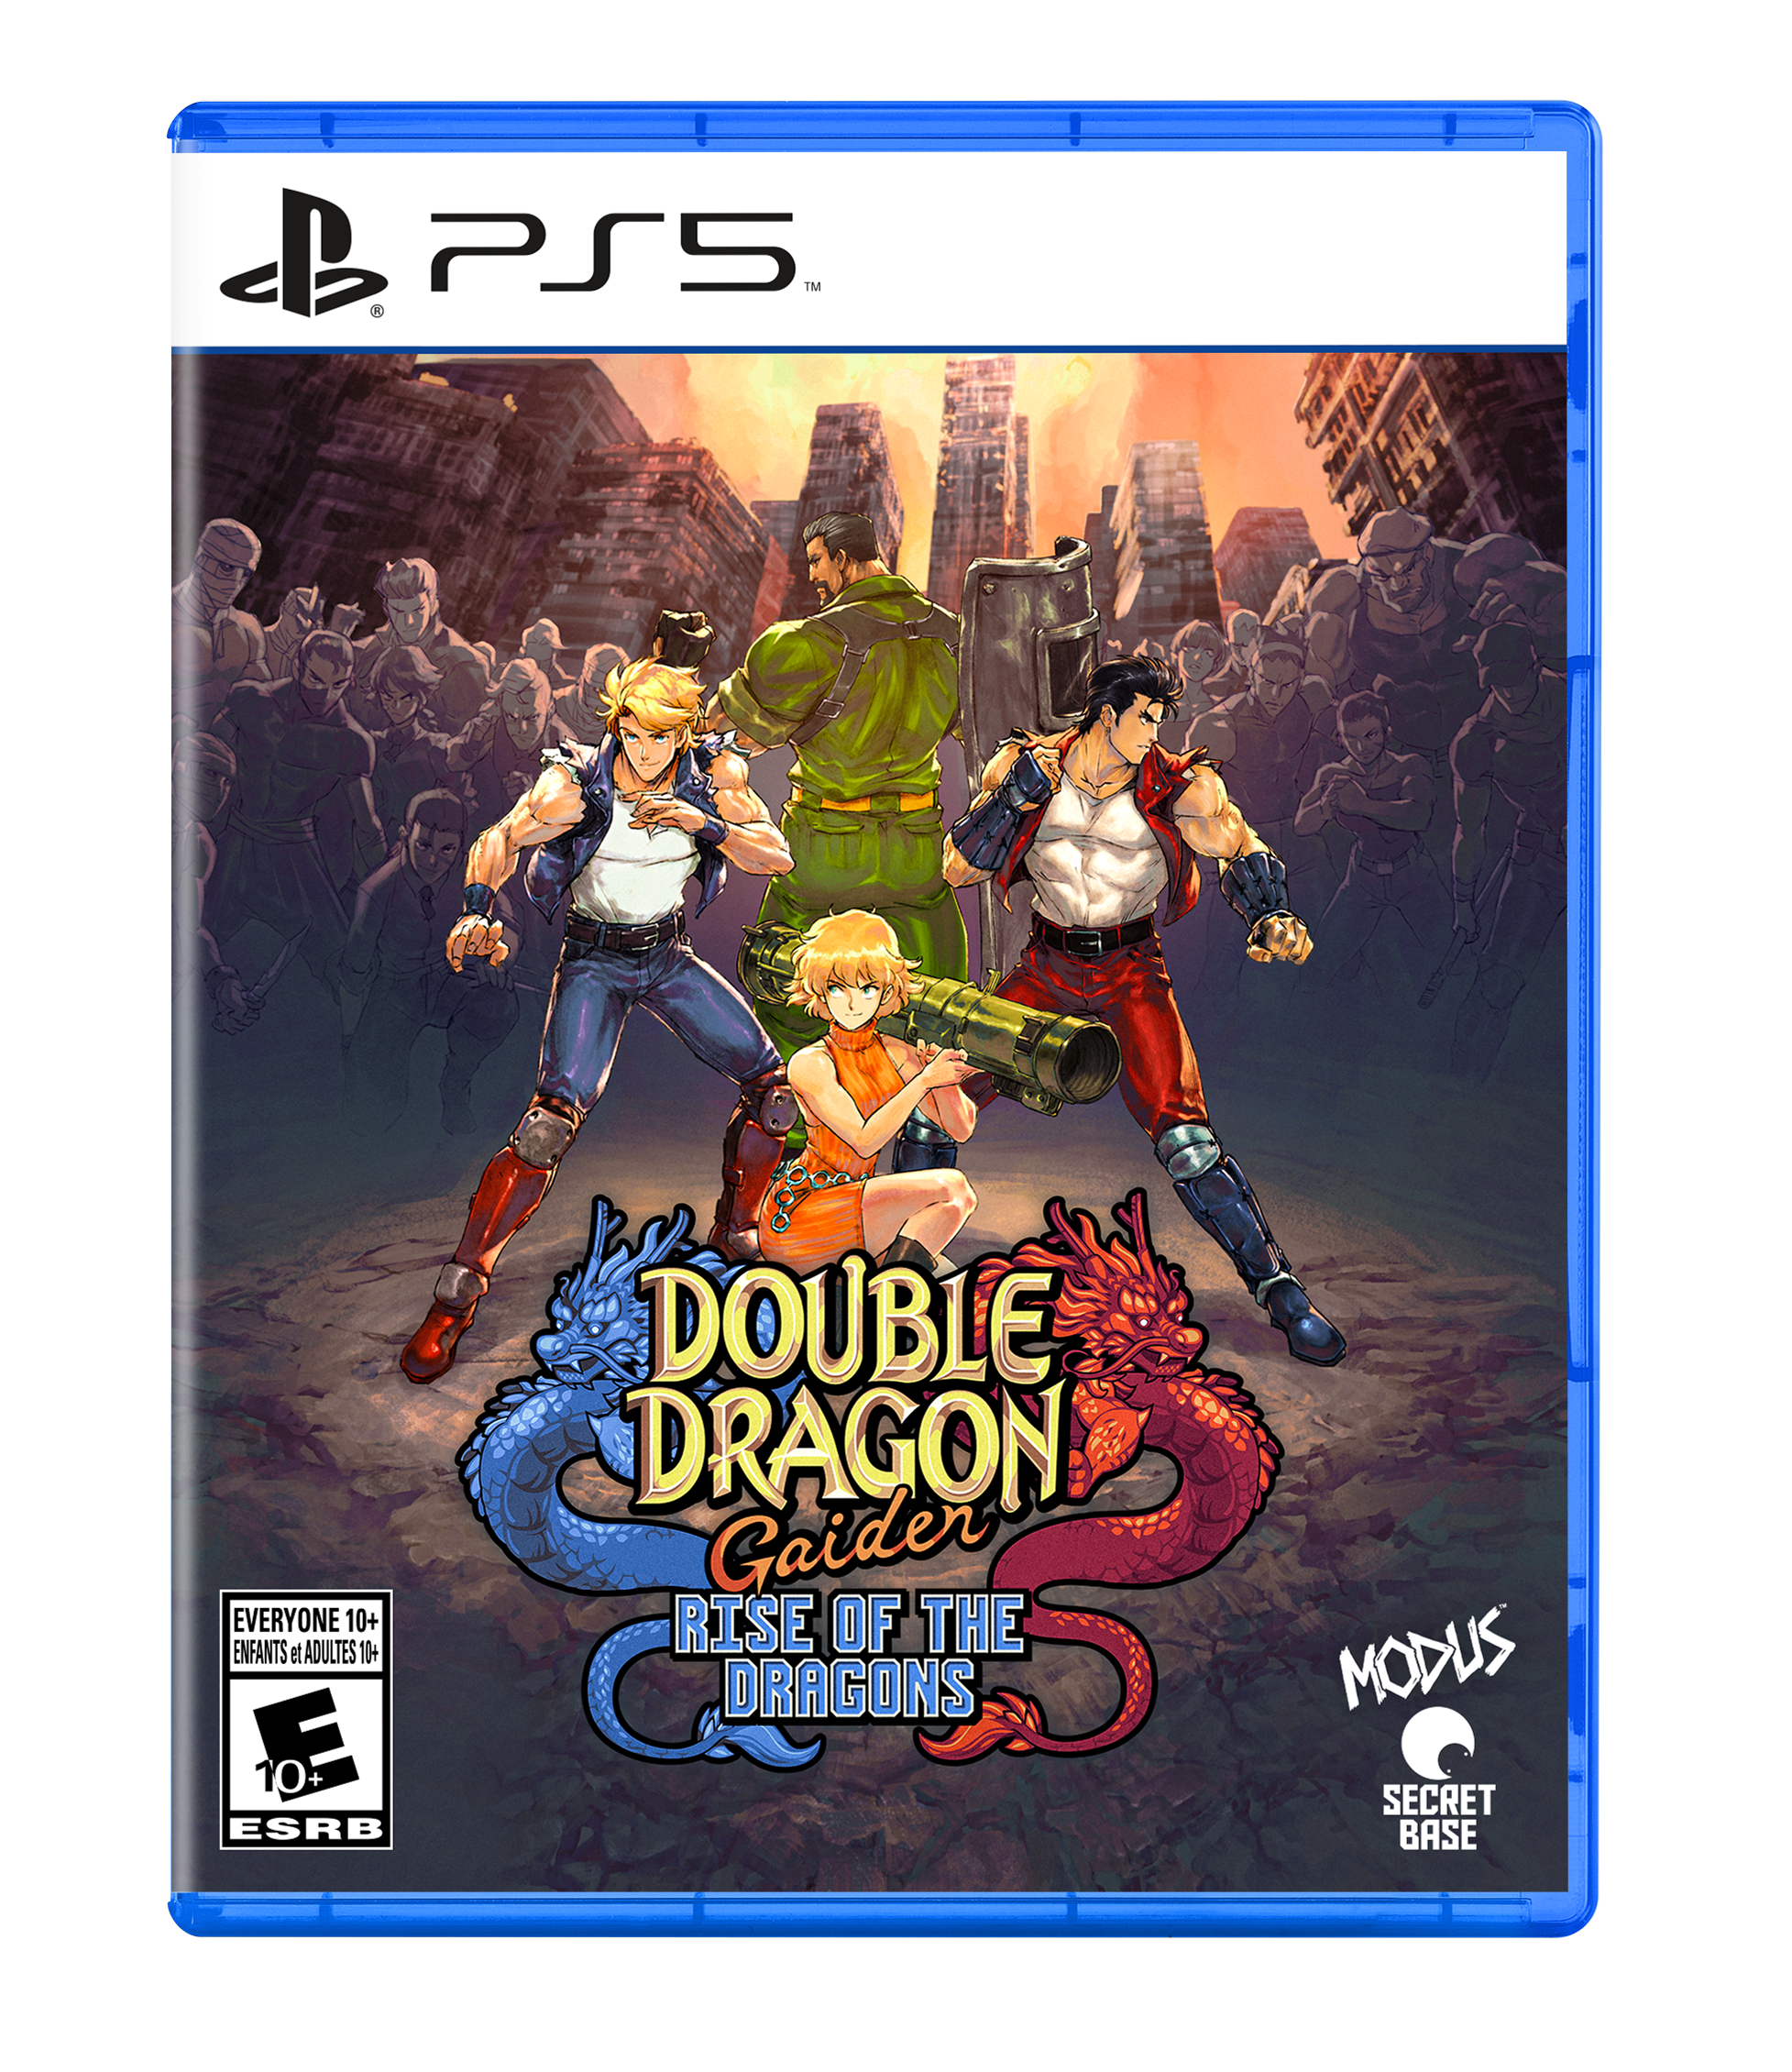 Double Dragon Gaiden: Rise of the Dragons Launches for Consoles and PC on  July 27 - QooApp News